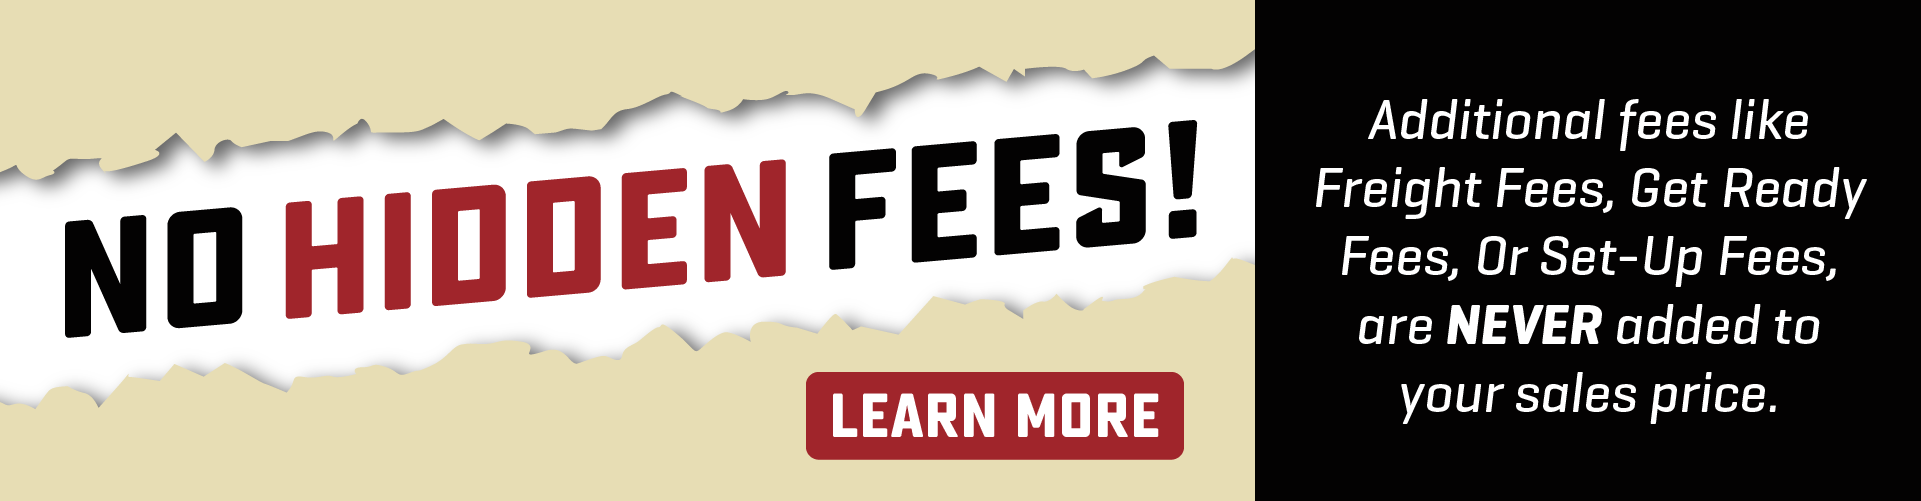 No Hidden Fees Added To Your Sales Price at Bish's RV - See details.